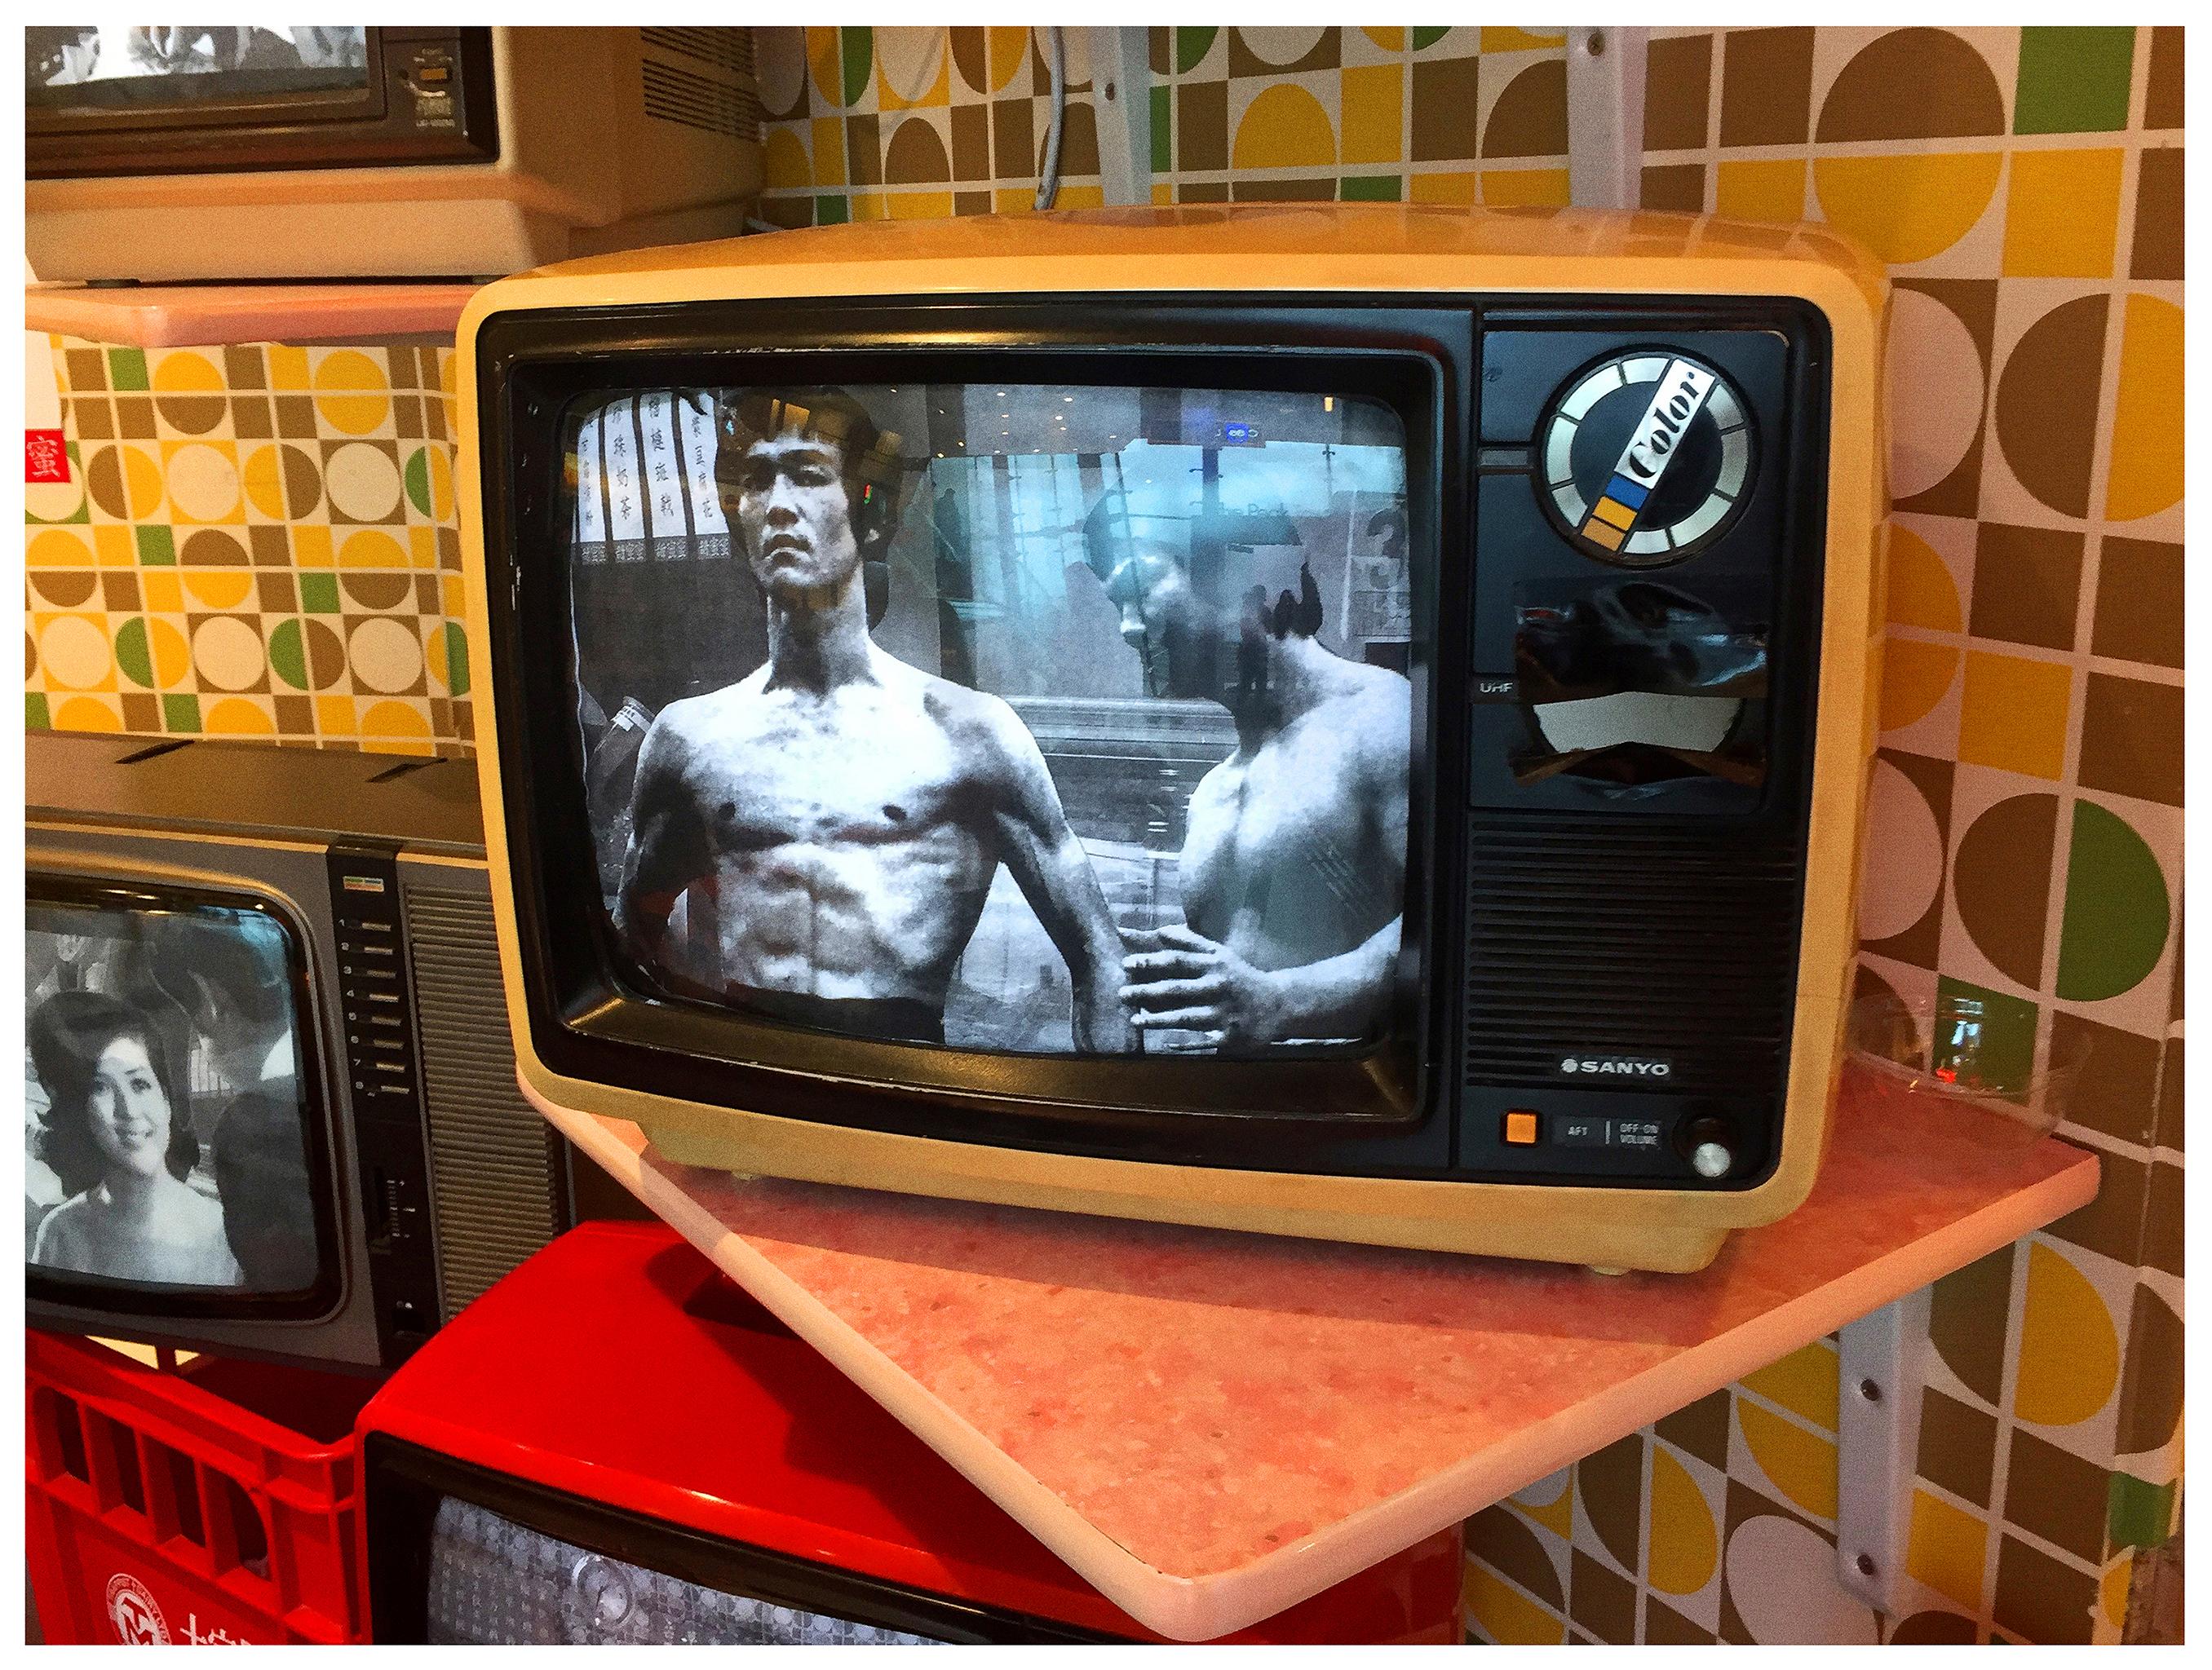 Bruce Lee TV, photograph by Richard Heeps captured at the top of Victoria Peak in Hong Kong. Seventies inspired mustard wallpaper is the backdrop for a black and white vintage Sanyo TV featuring Martial Arts icon Bruce Lee.  

This artwork is a